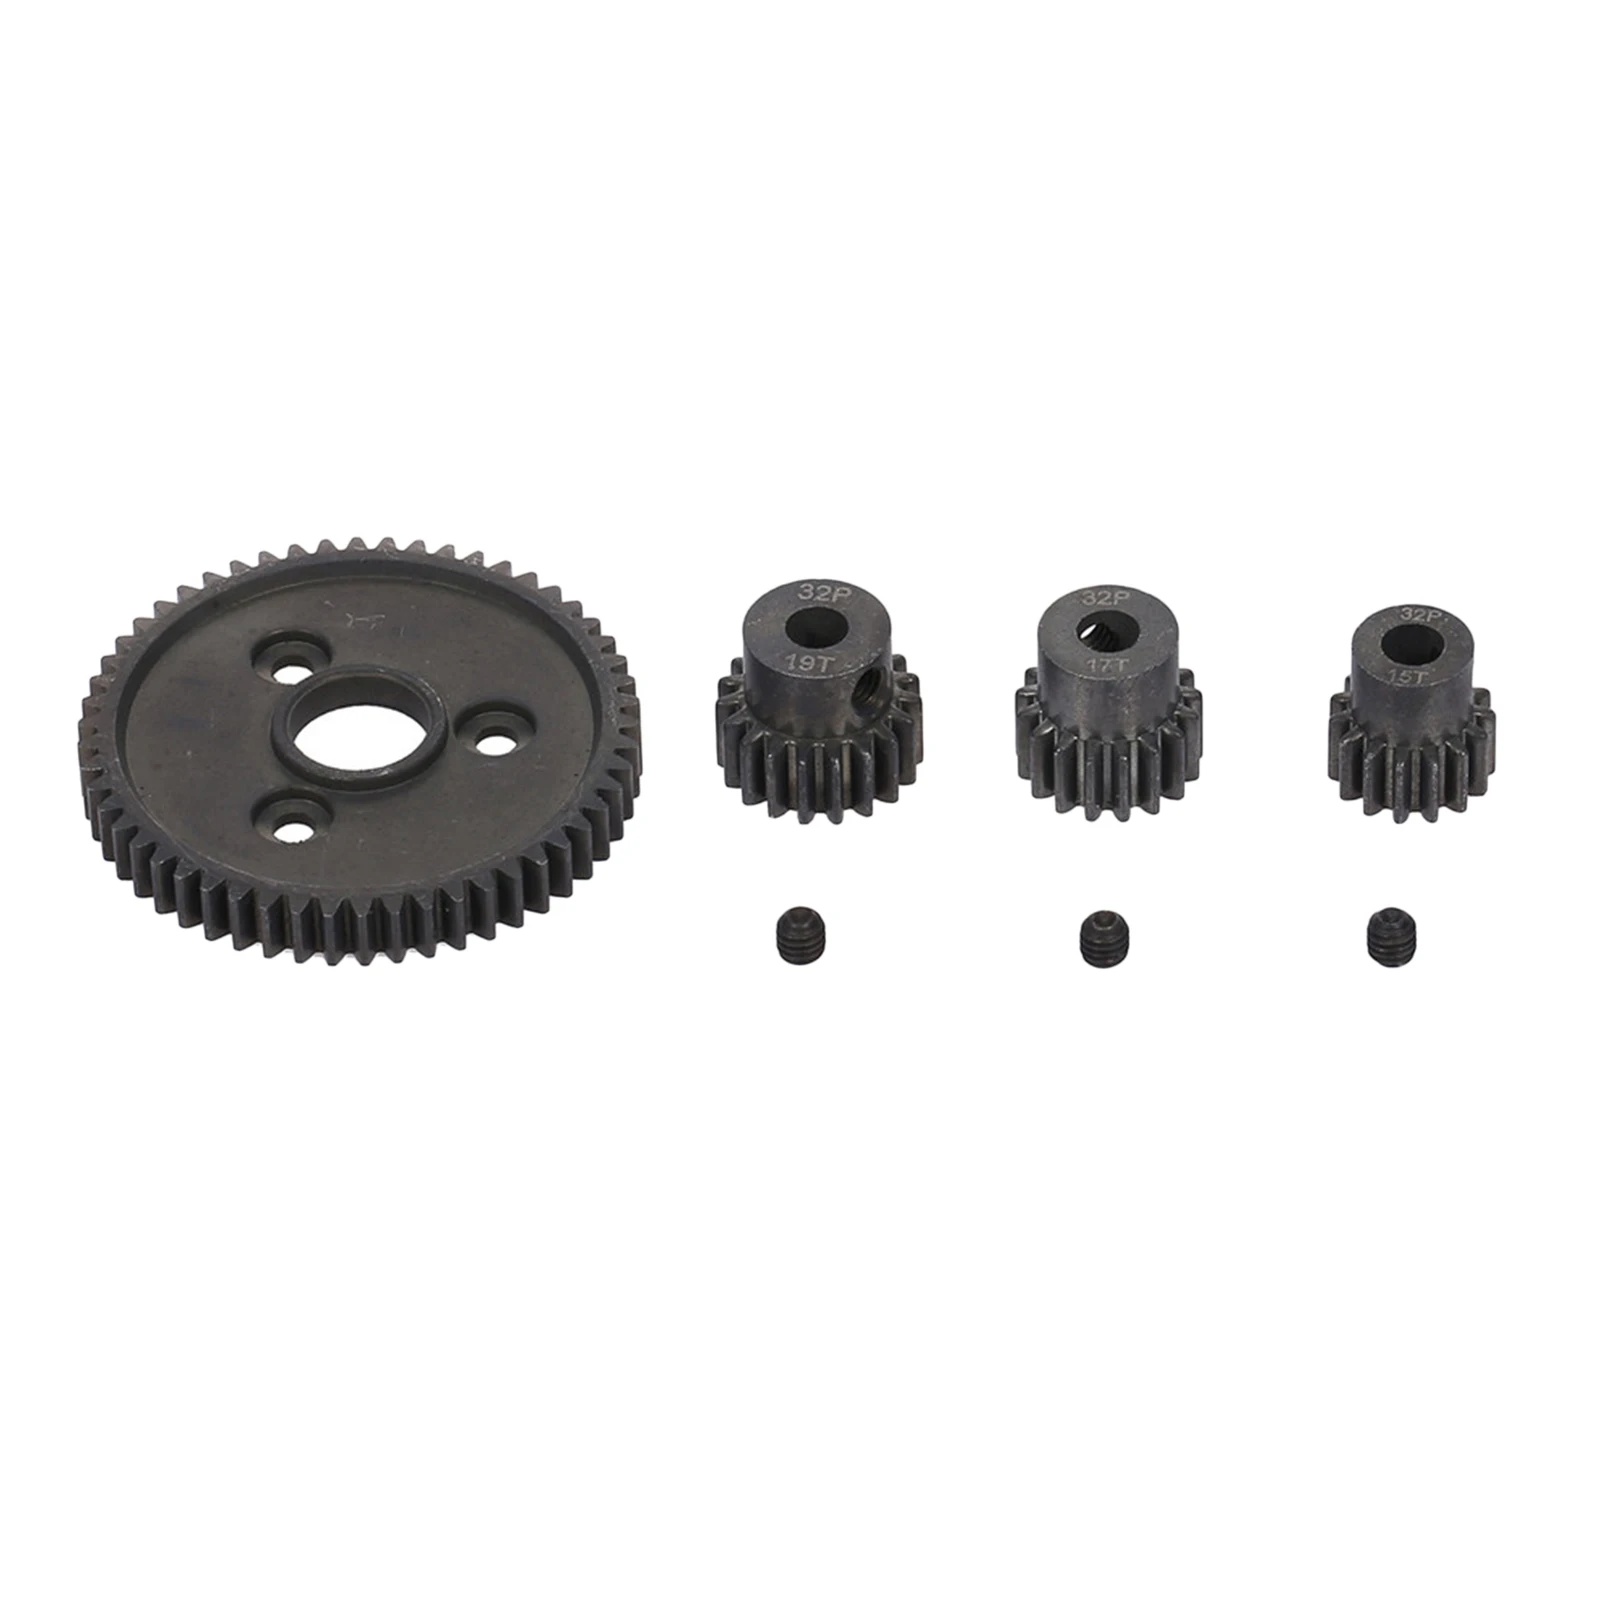 54T 0.8 32P Spur Motor And 15T / 17T / 19T Motor Sprockets Set Fit for Traxas Slash 4x4 Short Course